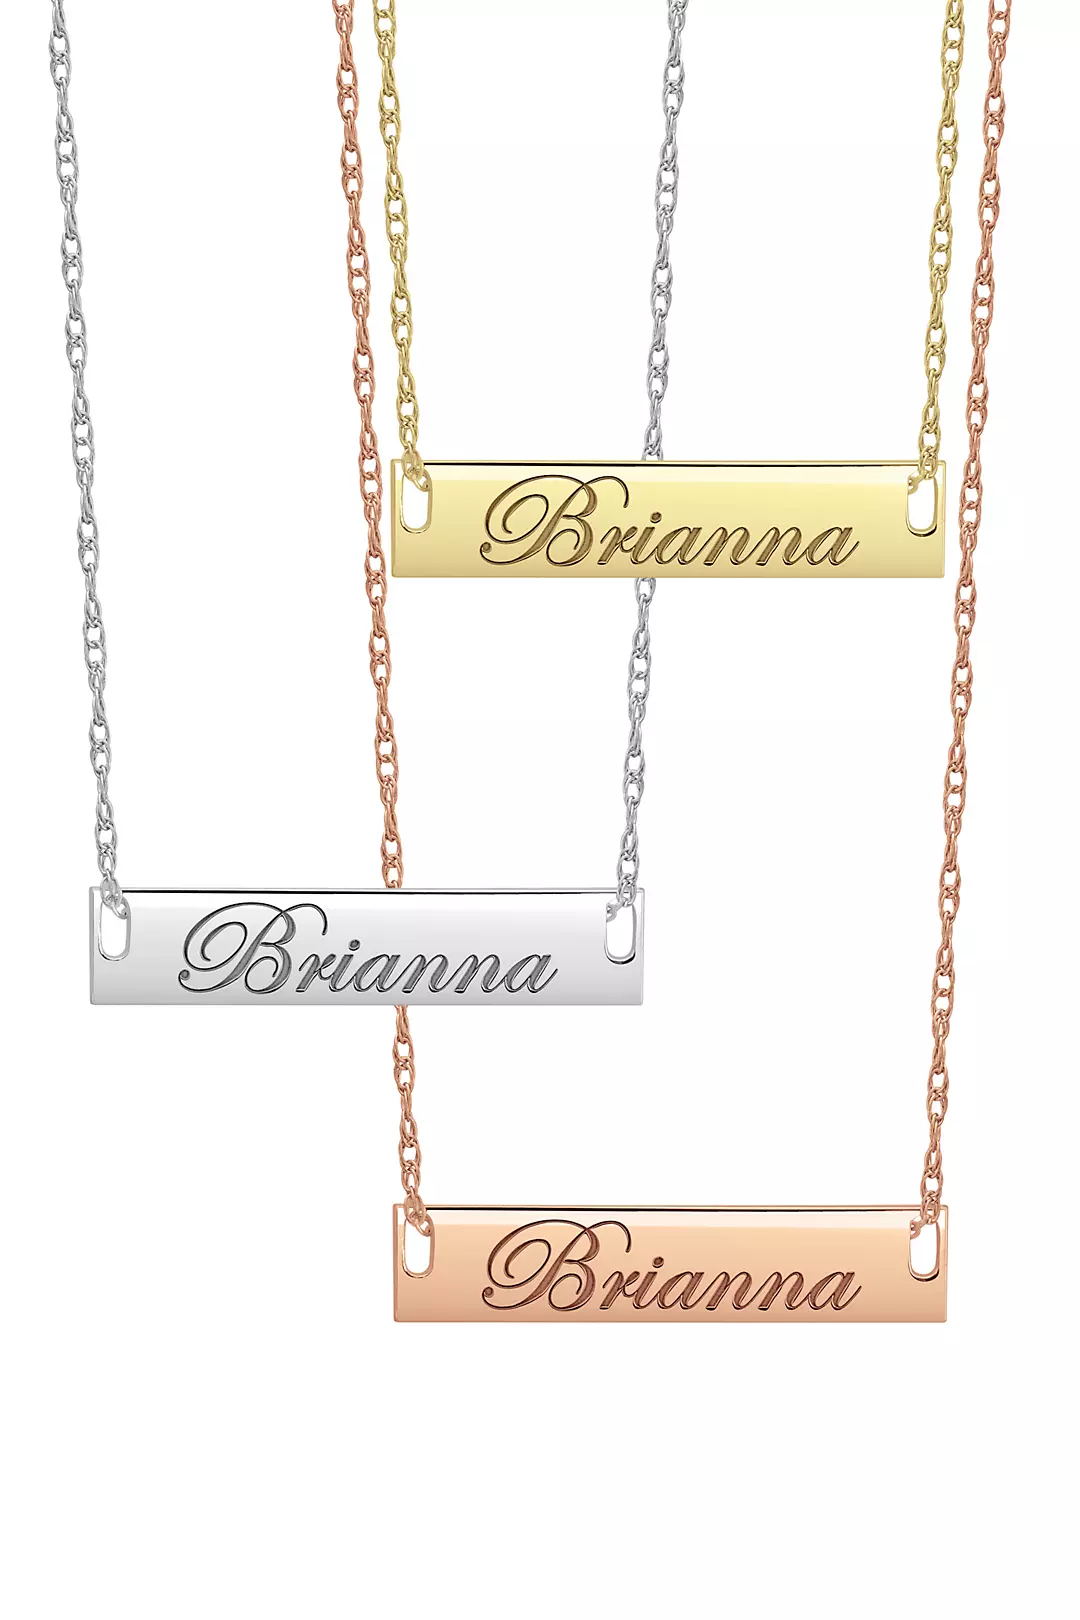 Personalized Bar Necklace with Script Lettering Image 2